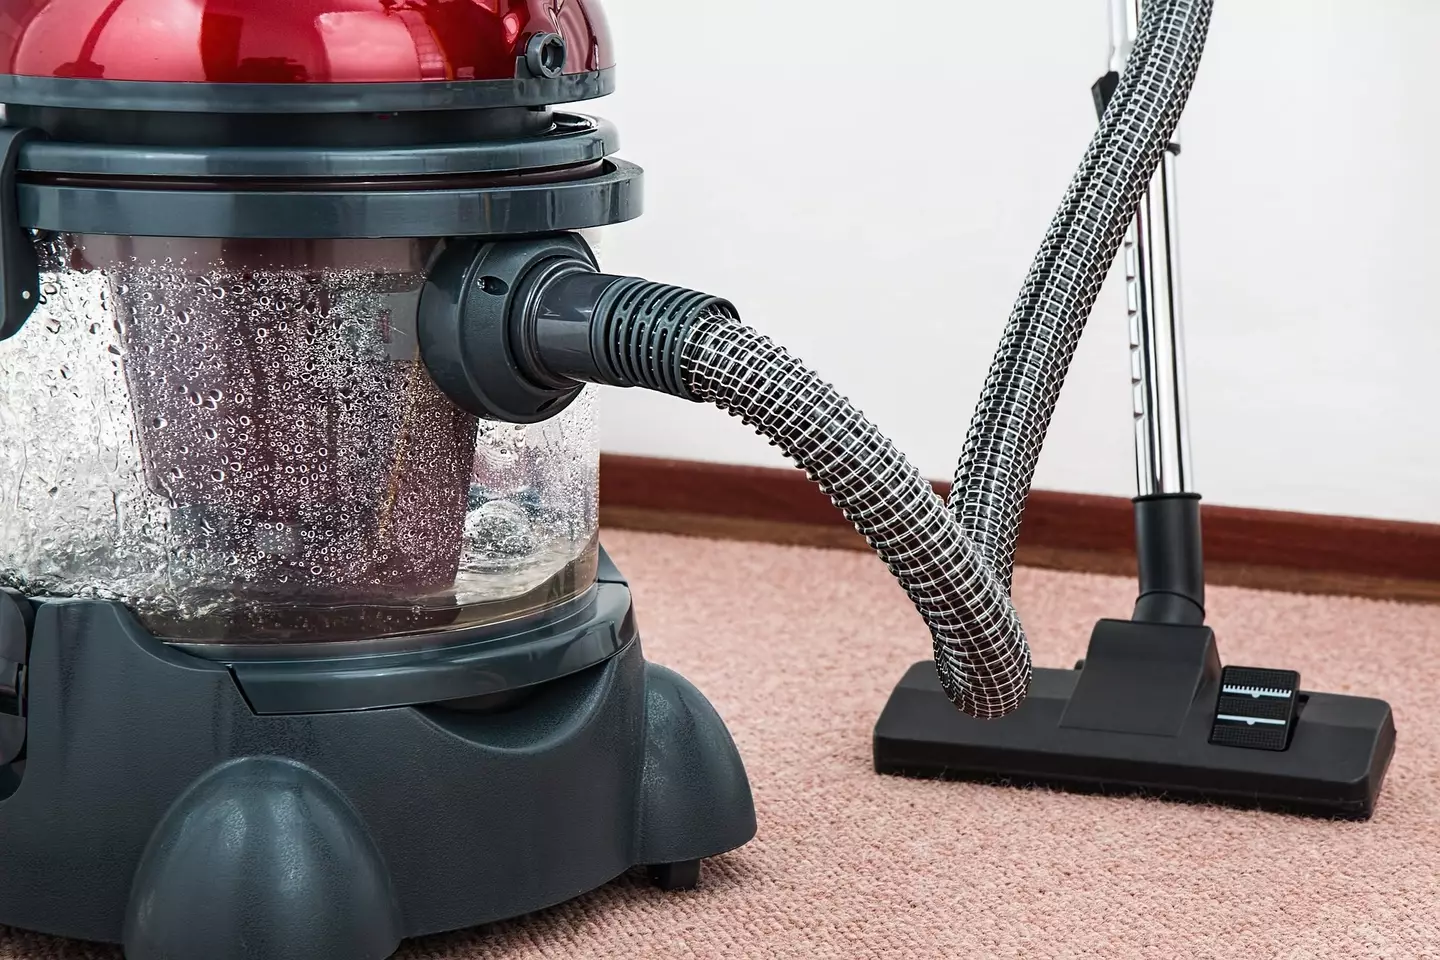 Brown or orange snot may mean you ought to do a spot of hoovering.